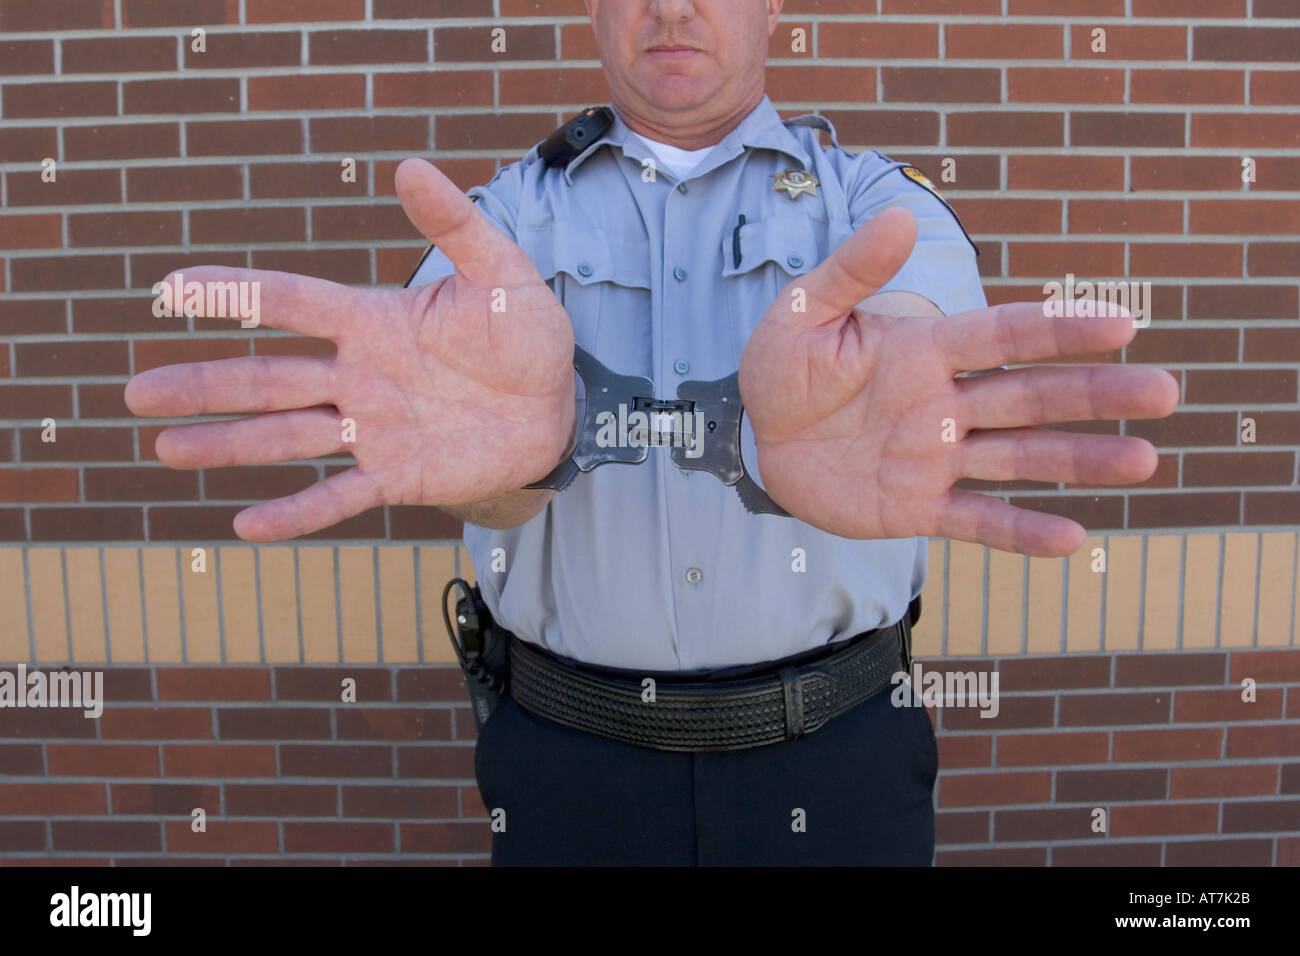 Corrections Officer in handcuffs. Stock Photo